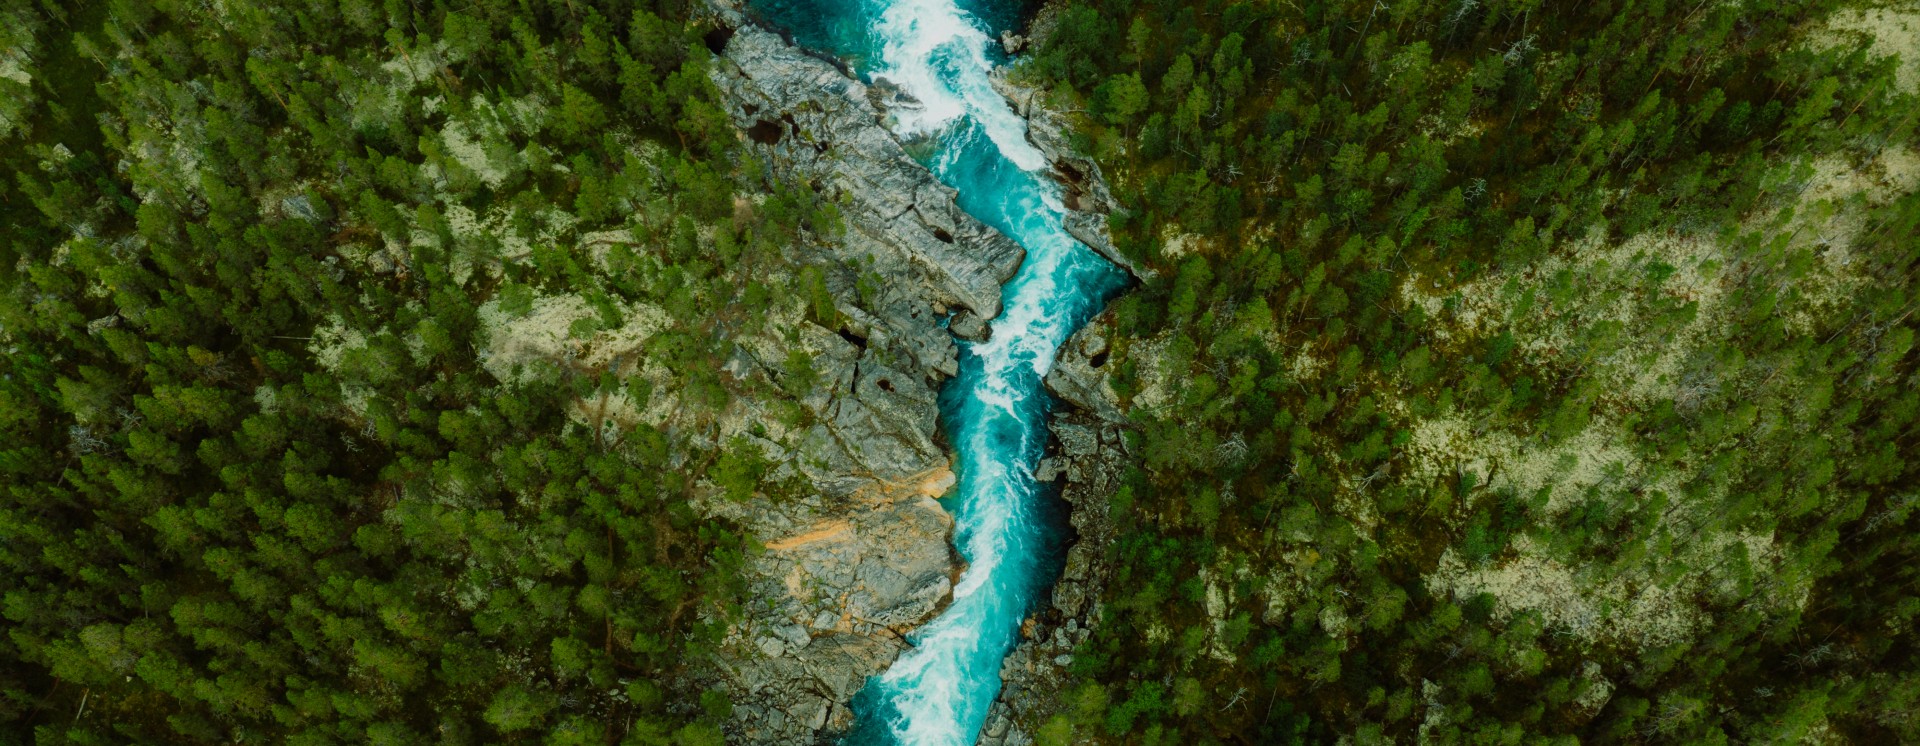 Aerial view of a river flowing through a green landscape